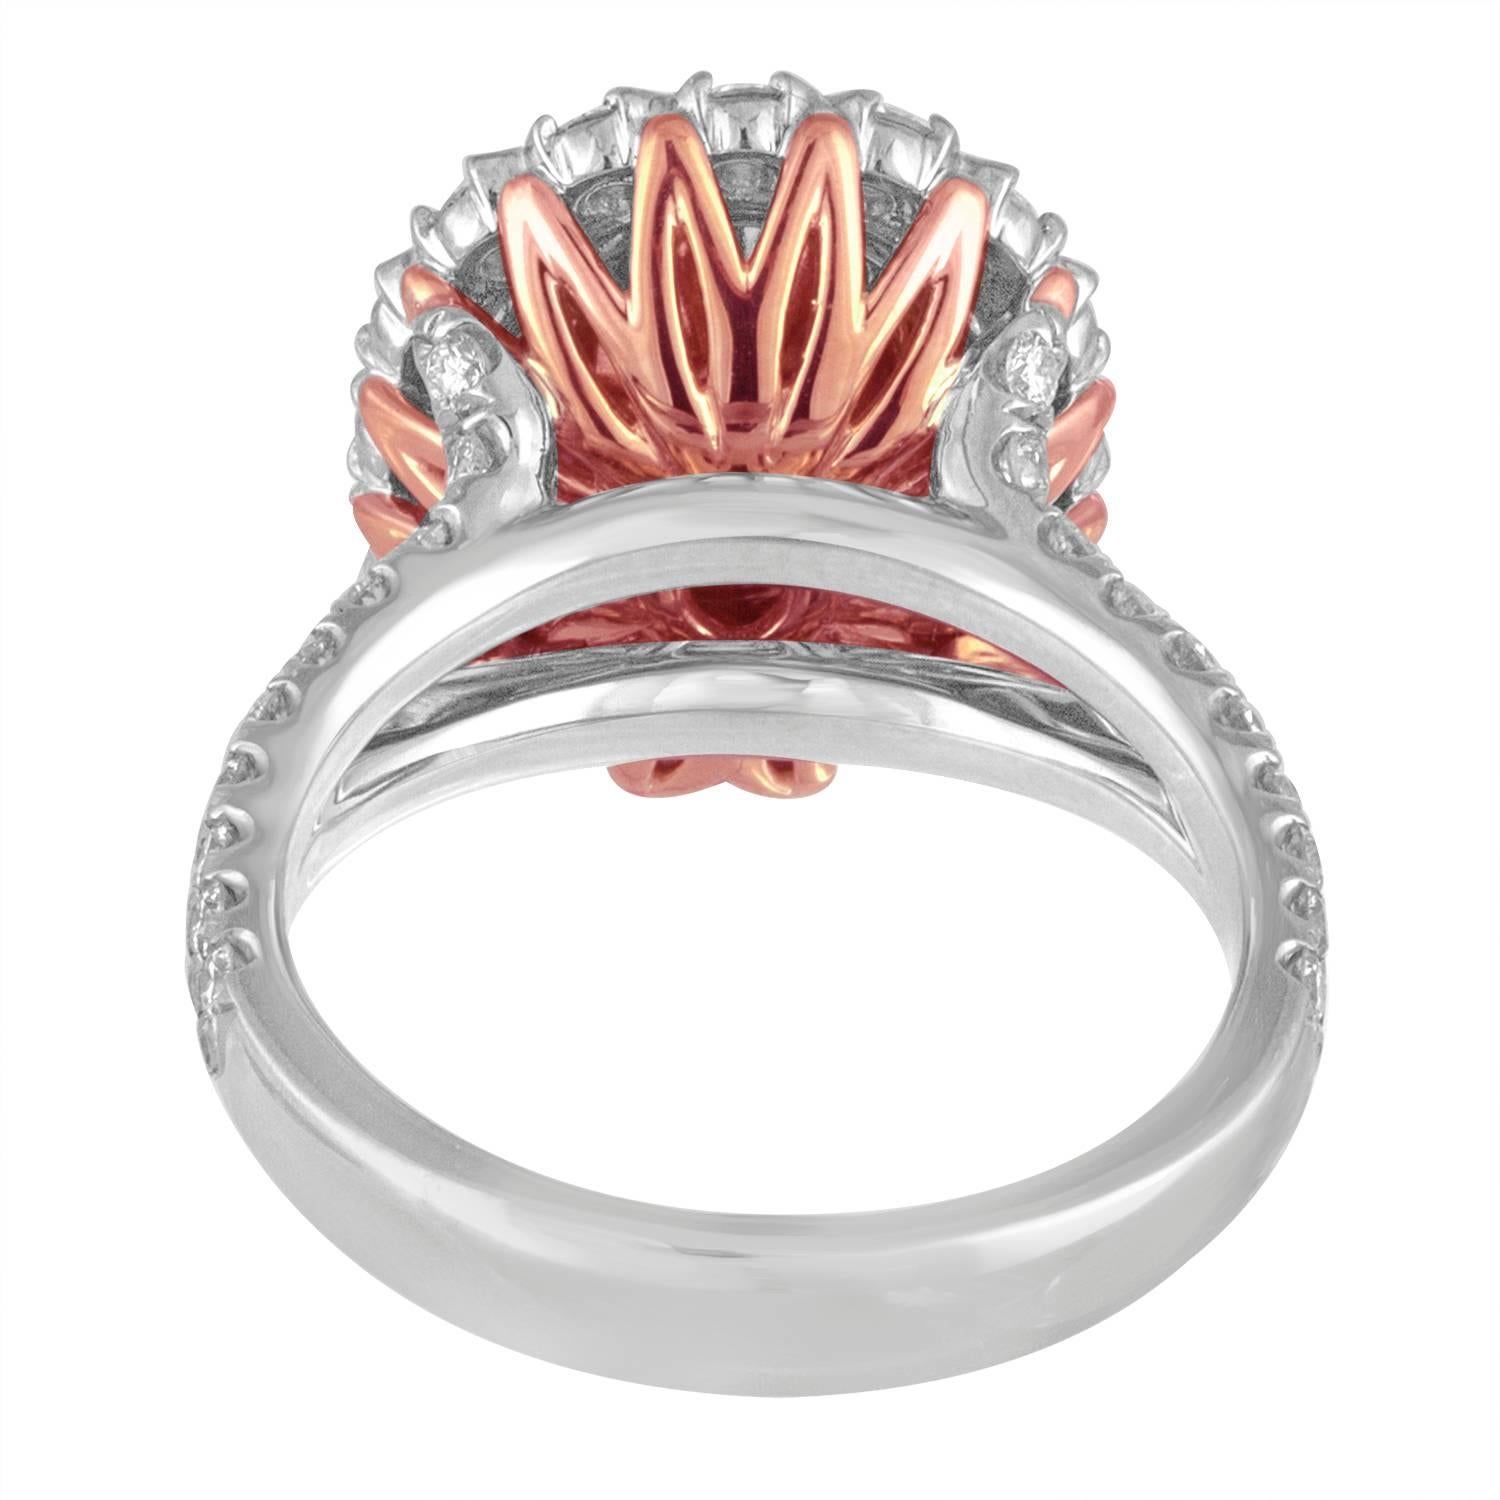 1.10 Carat GIA Certified Fancy Brownish Pink and White Diamond Platinum Ring In New Condition For Sale In New York, NY